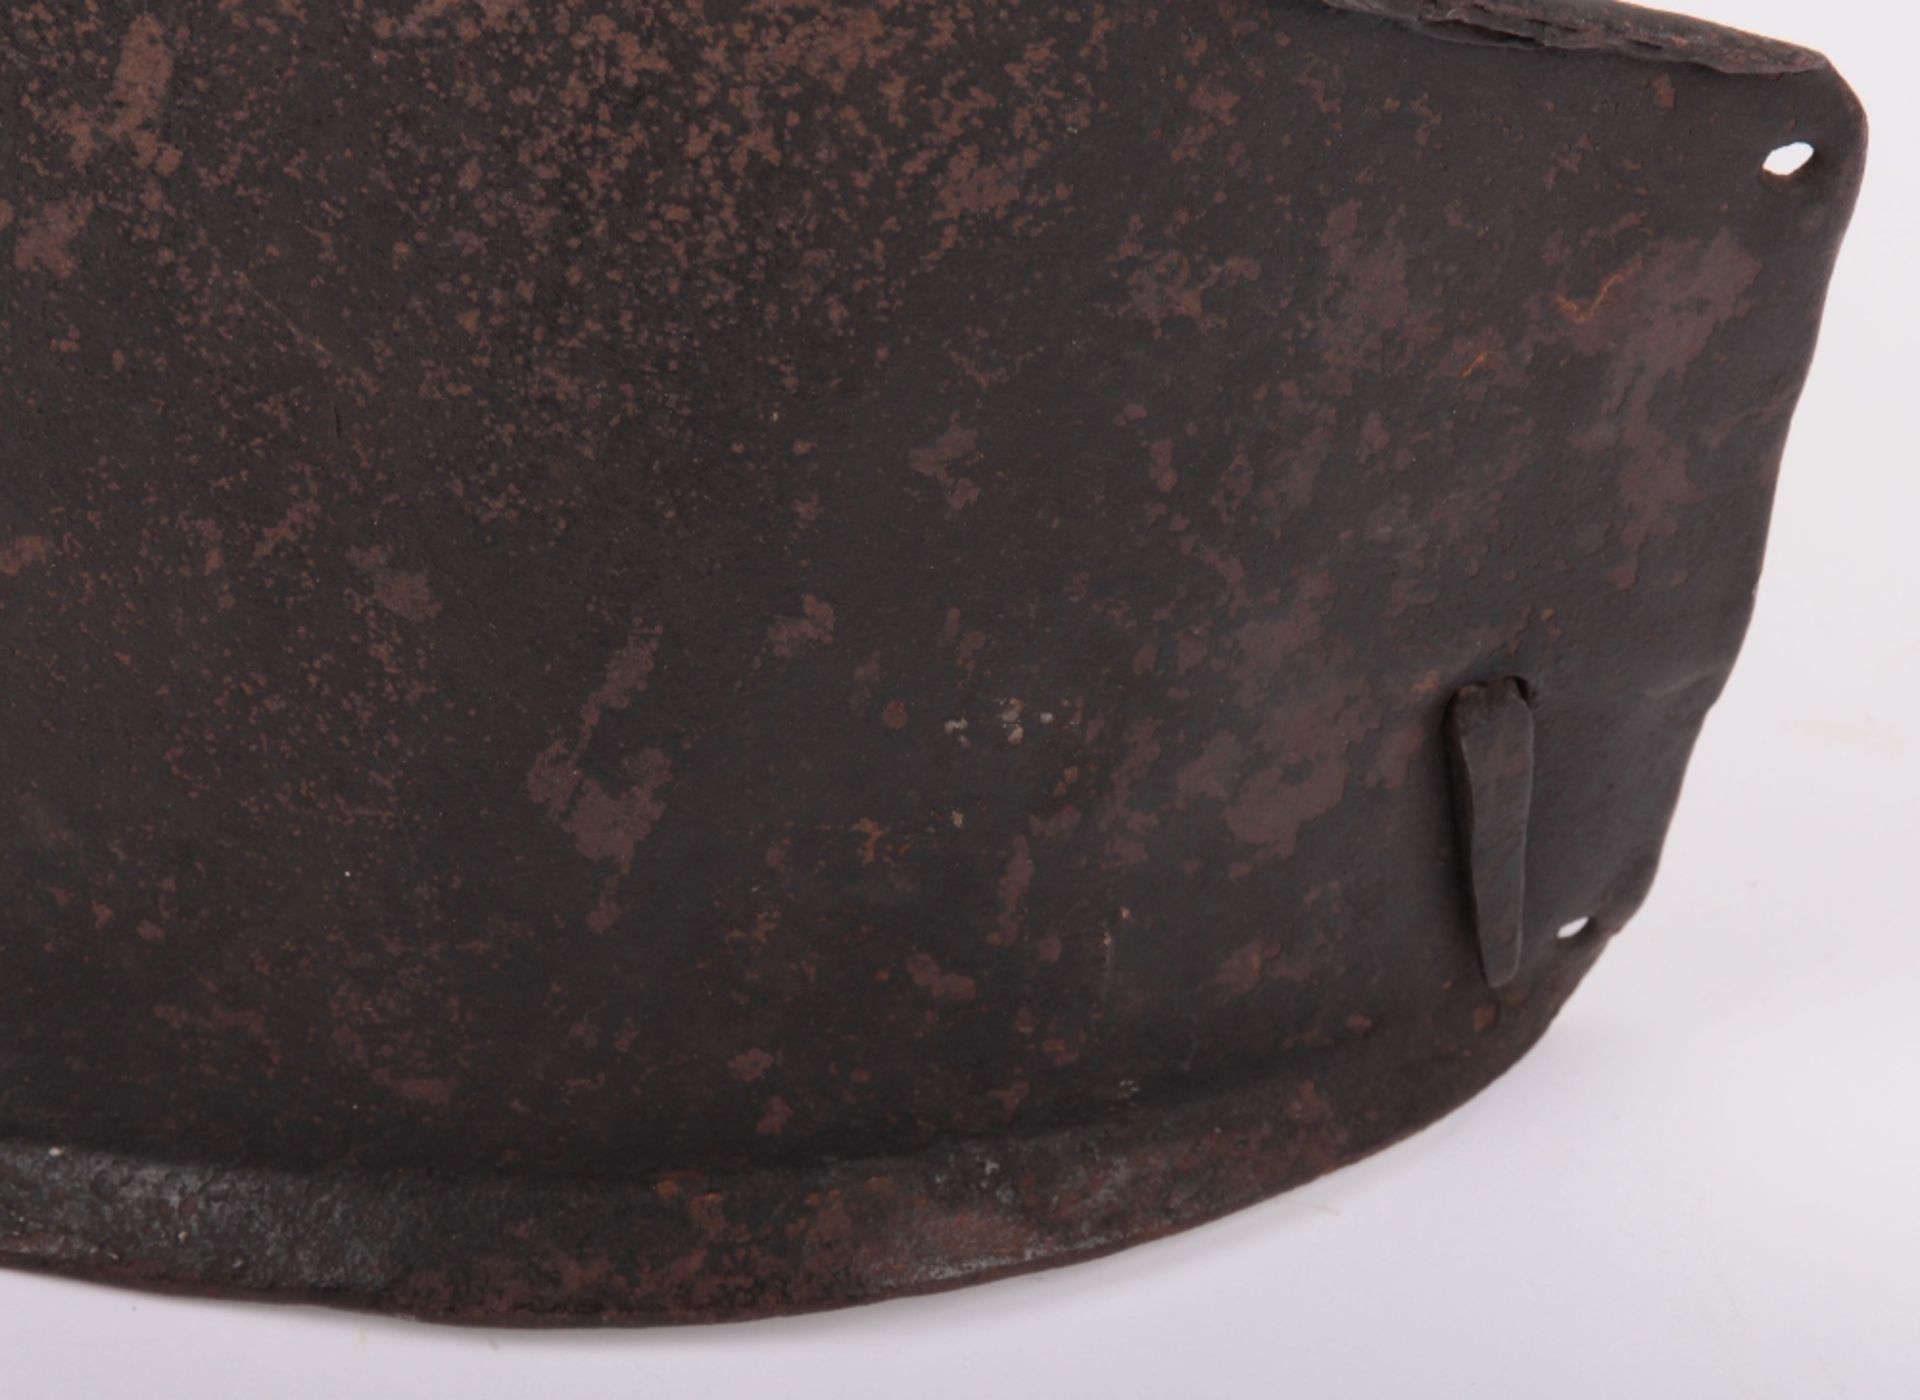 Good Heavy 17th Century Cavalry Troopers Breastplate - Image 7 of 14